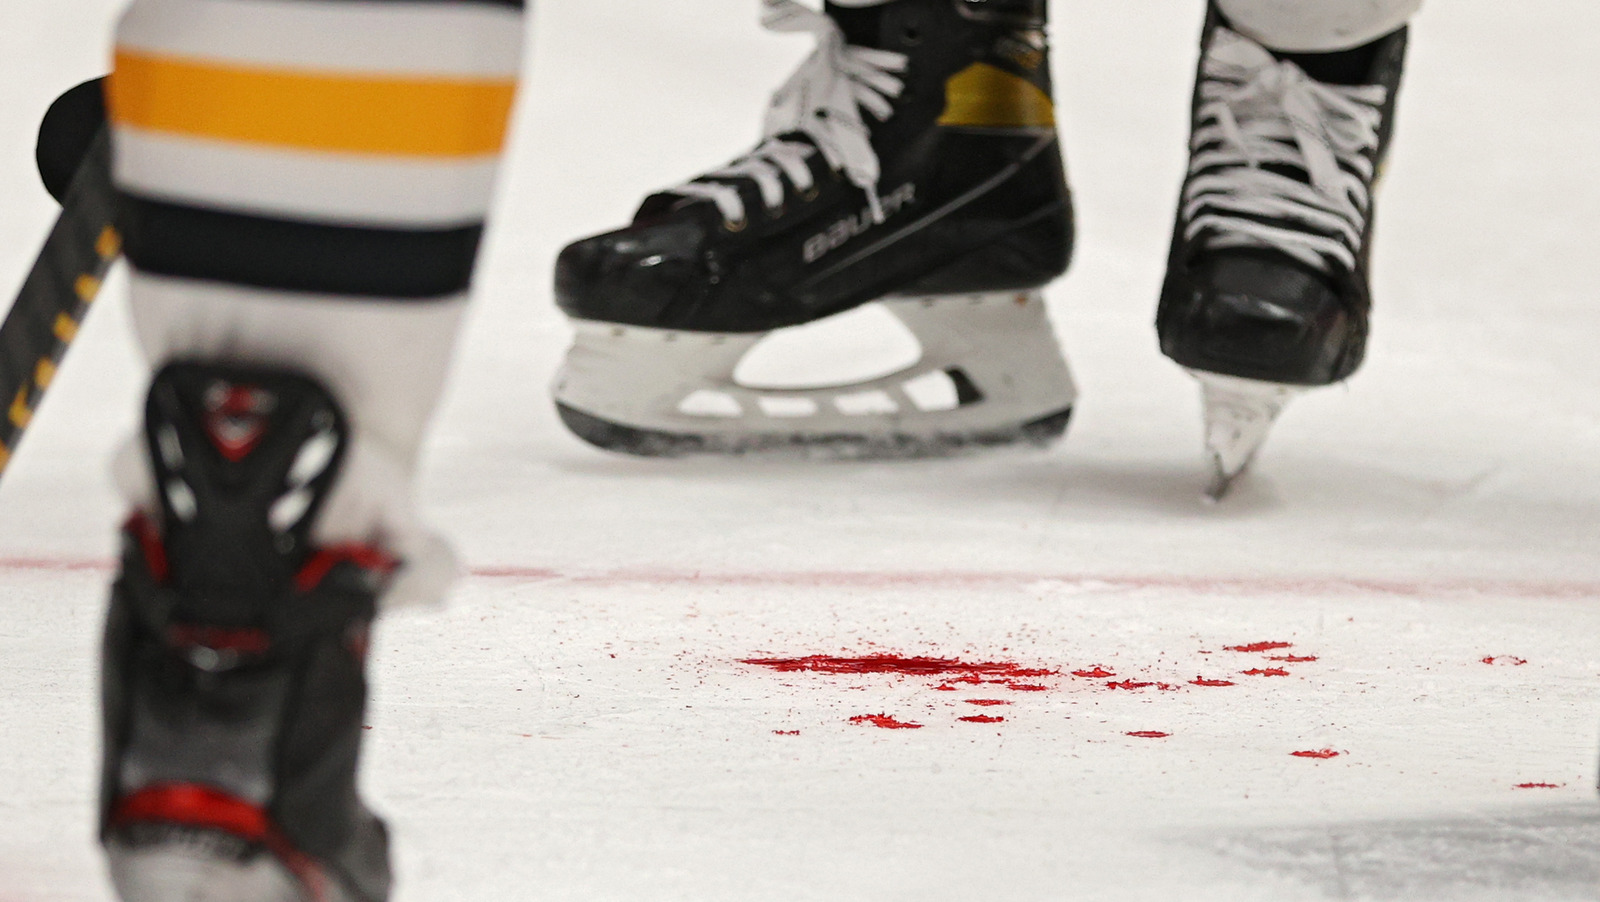 What have been some of the most horrific injuries in Ice Hockey